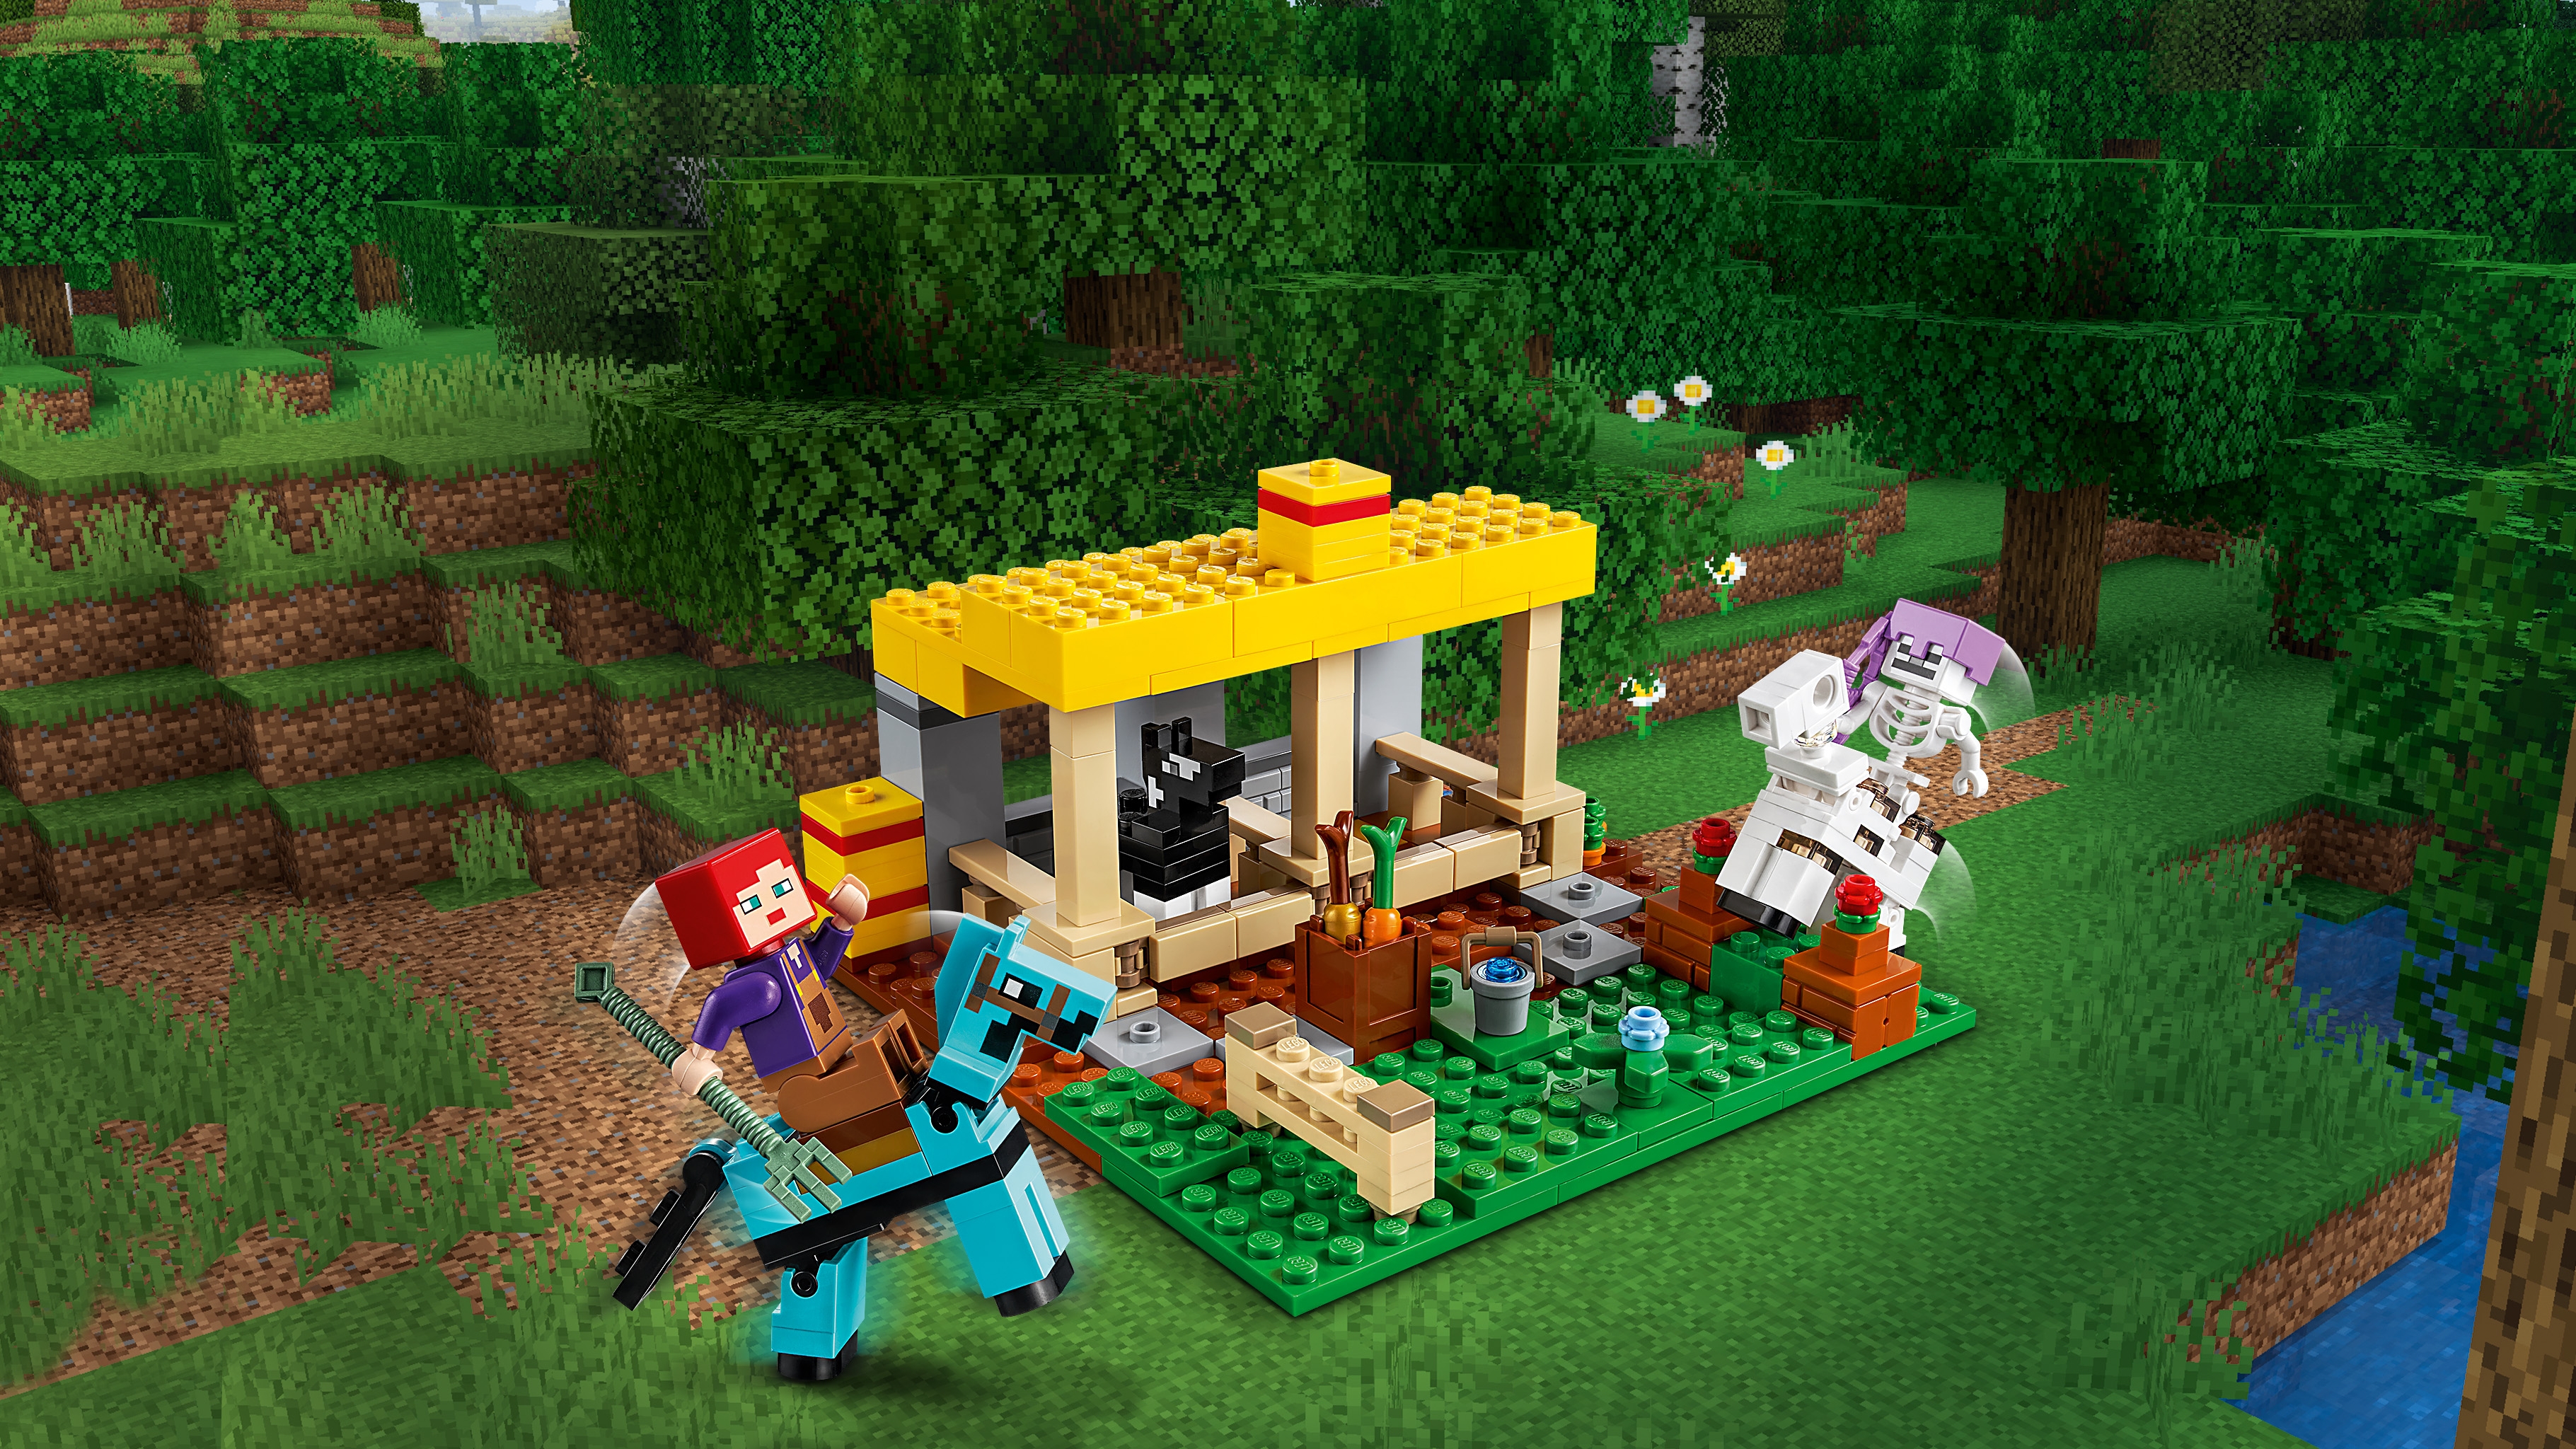 The Horse Stable - LEGO® Minecraft™ Sets - LEGO.com kids